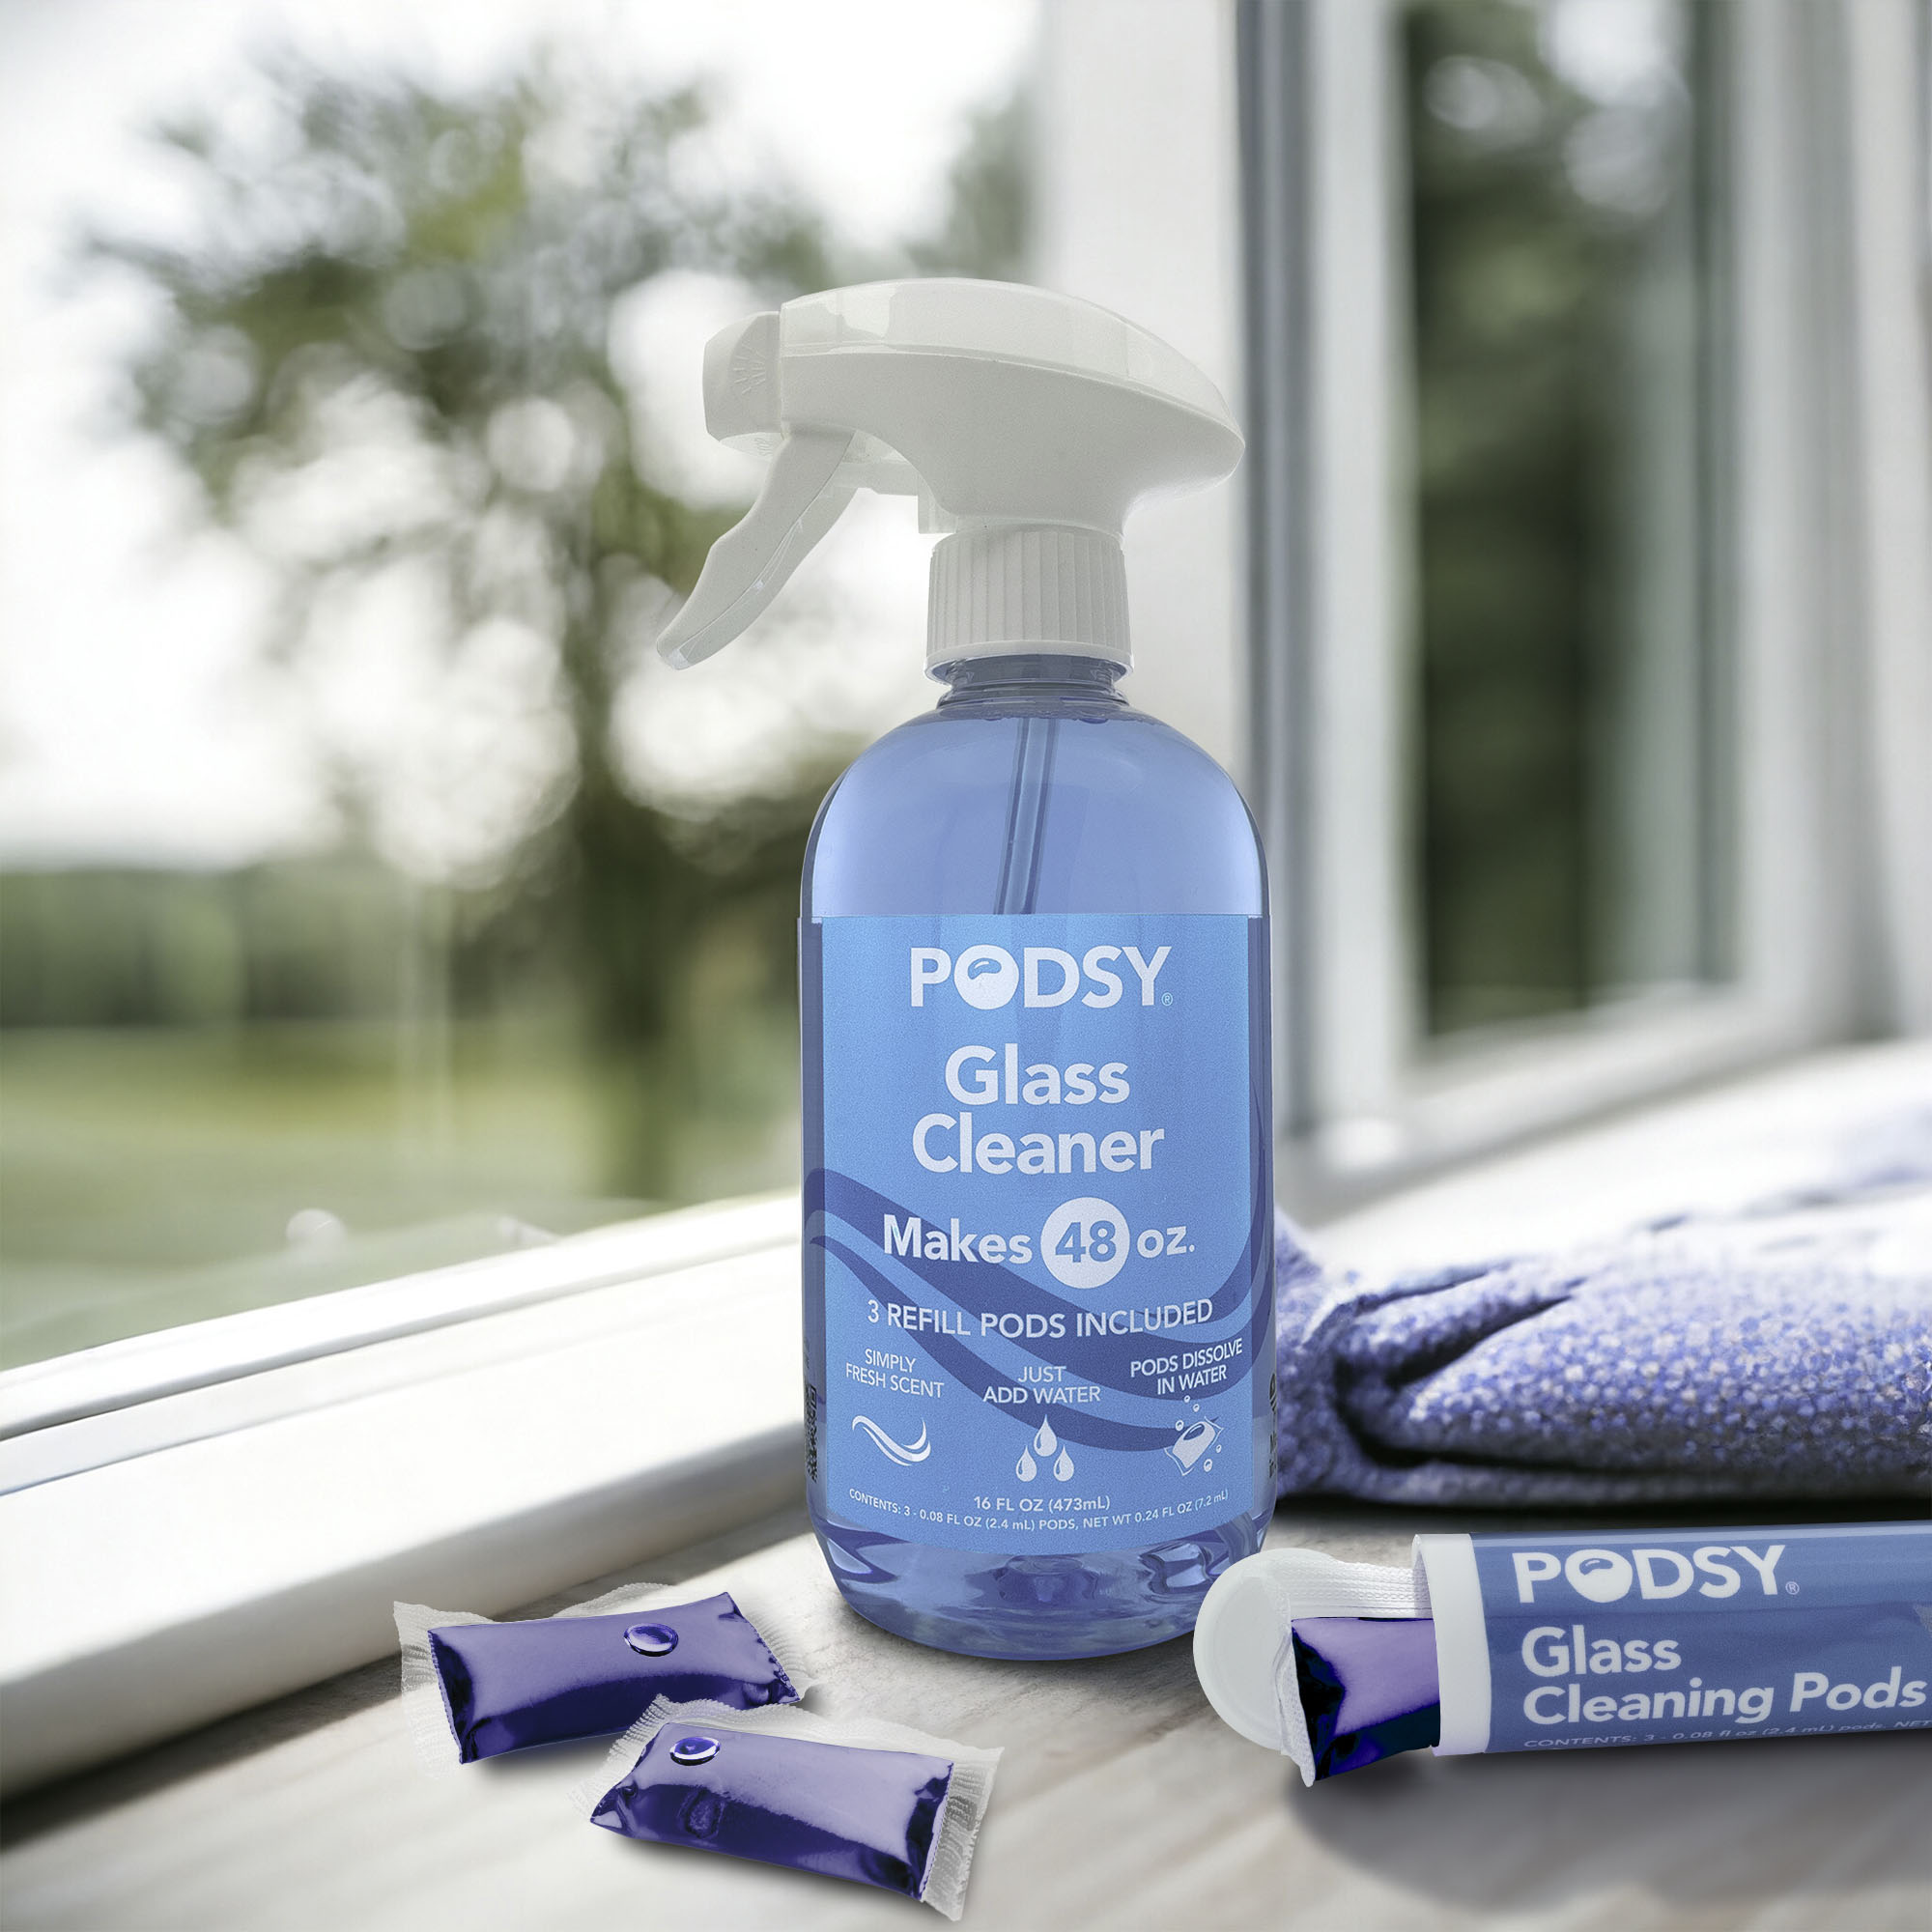 Podsy Glass Cleaner and Refill Pods